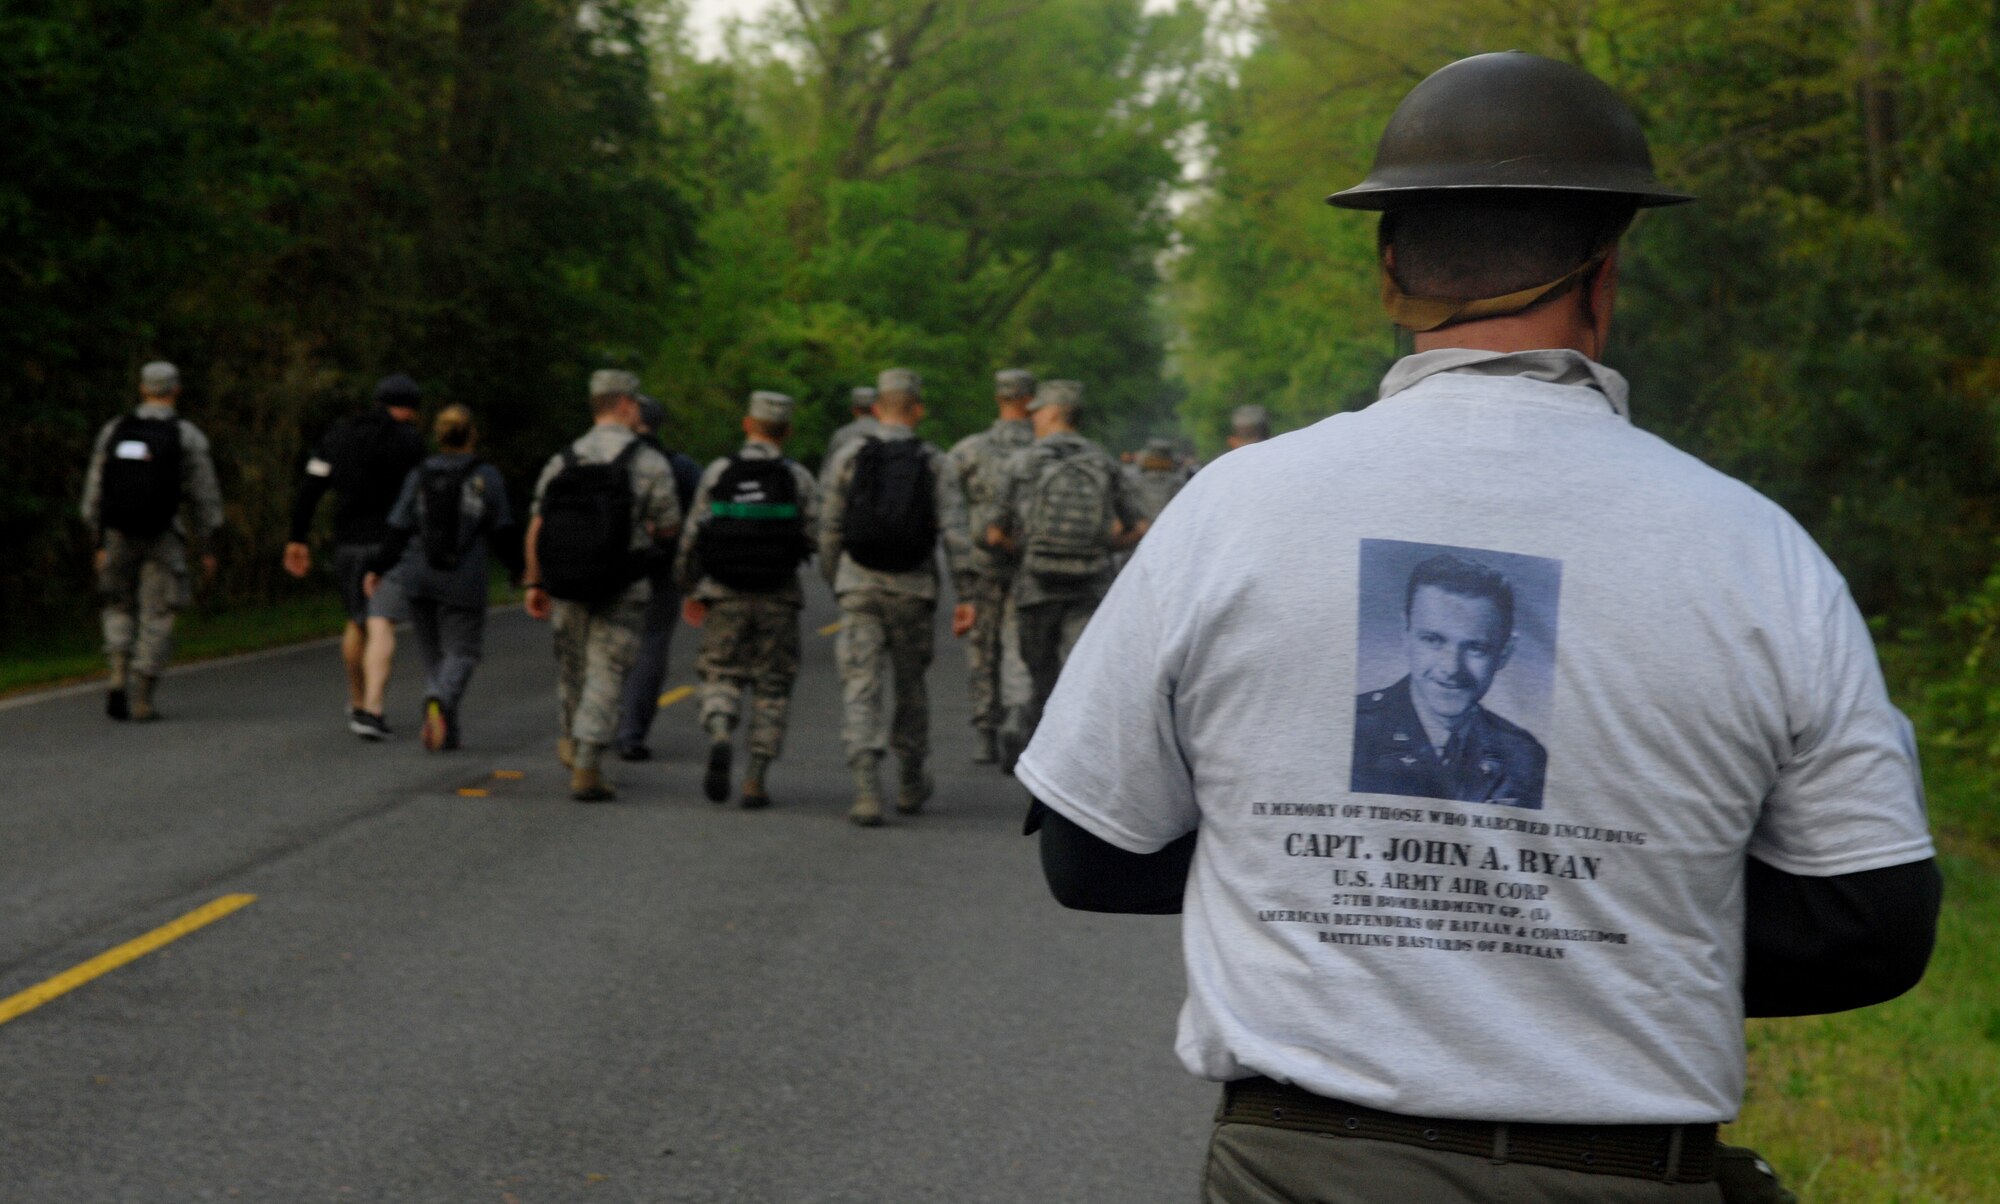 A relative of U.S. Army Air Corps Capt. John Ryan, a veteran killed during the Bataan Death March, walks the 16.6-mile Bataan Death March memorial walk at Chesapeake, Va., April 27, 2013. During the ceremony after the walk, veterans had an opportunity to speak about their experience from the original Bataan Death March. (U.S. Air Force photo by Airman 1st Class Austin Harvill/Released)